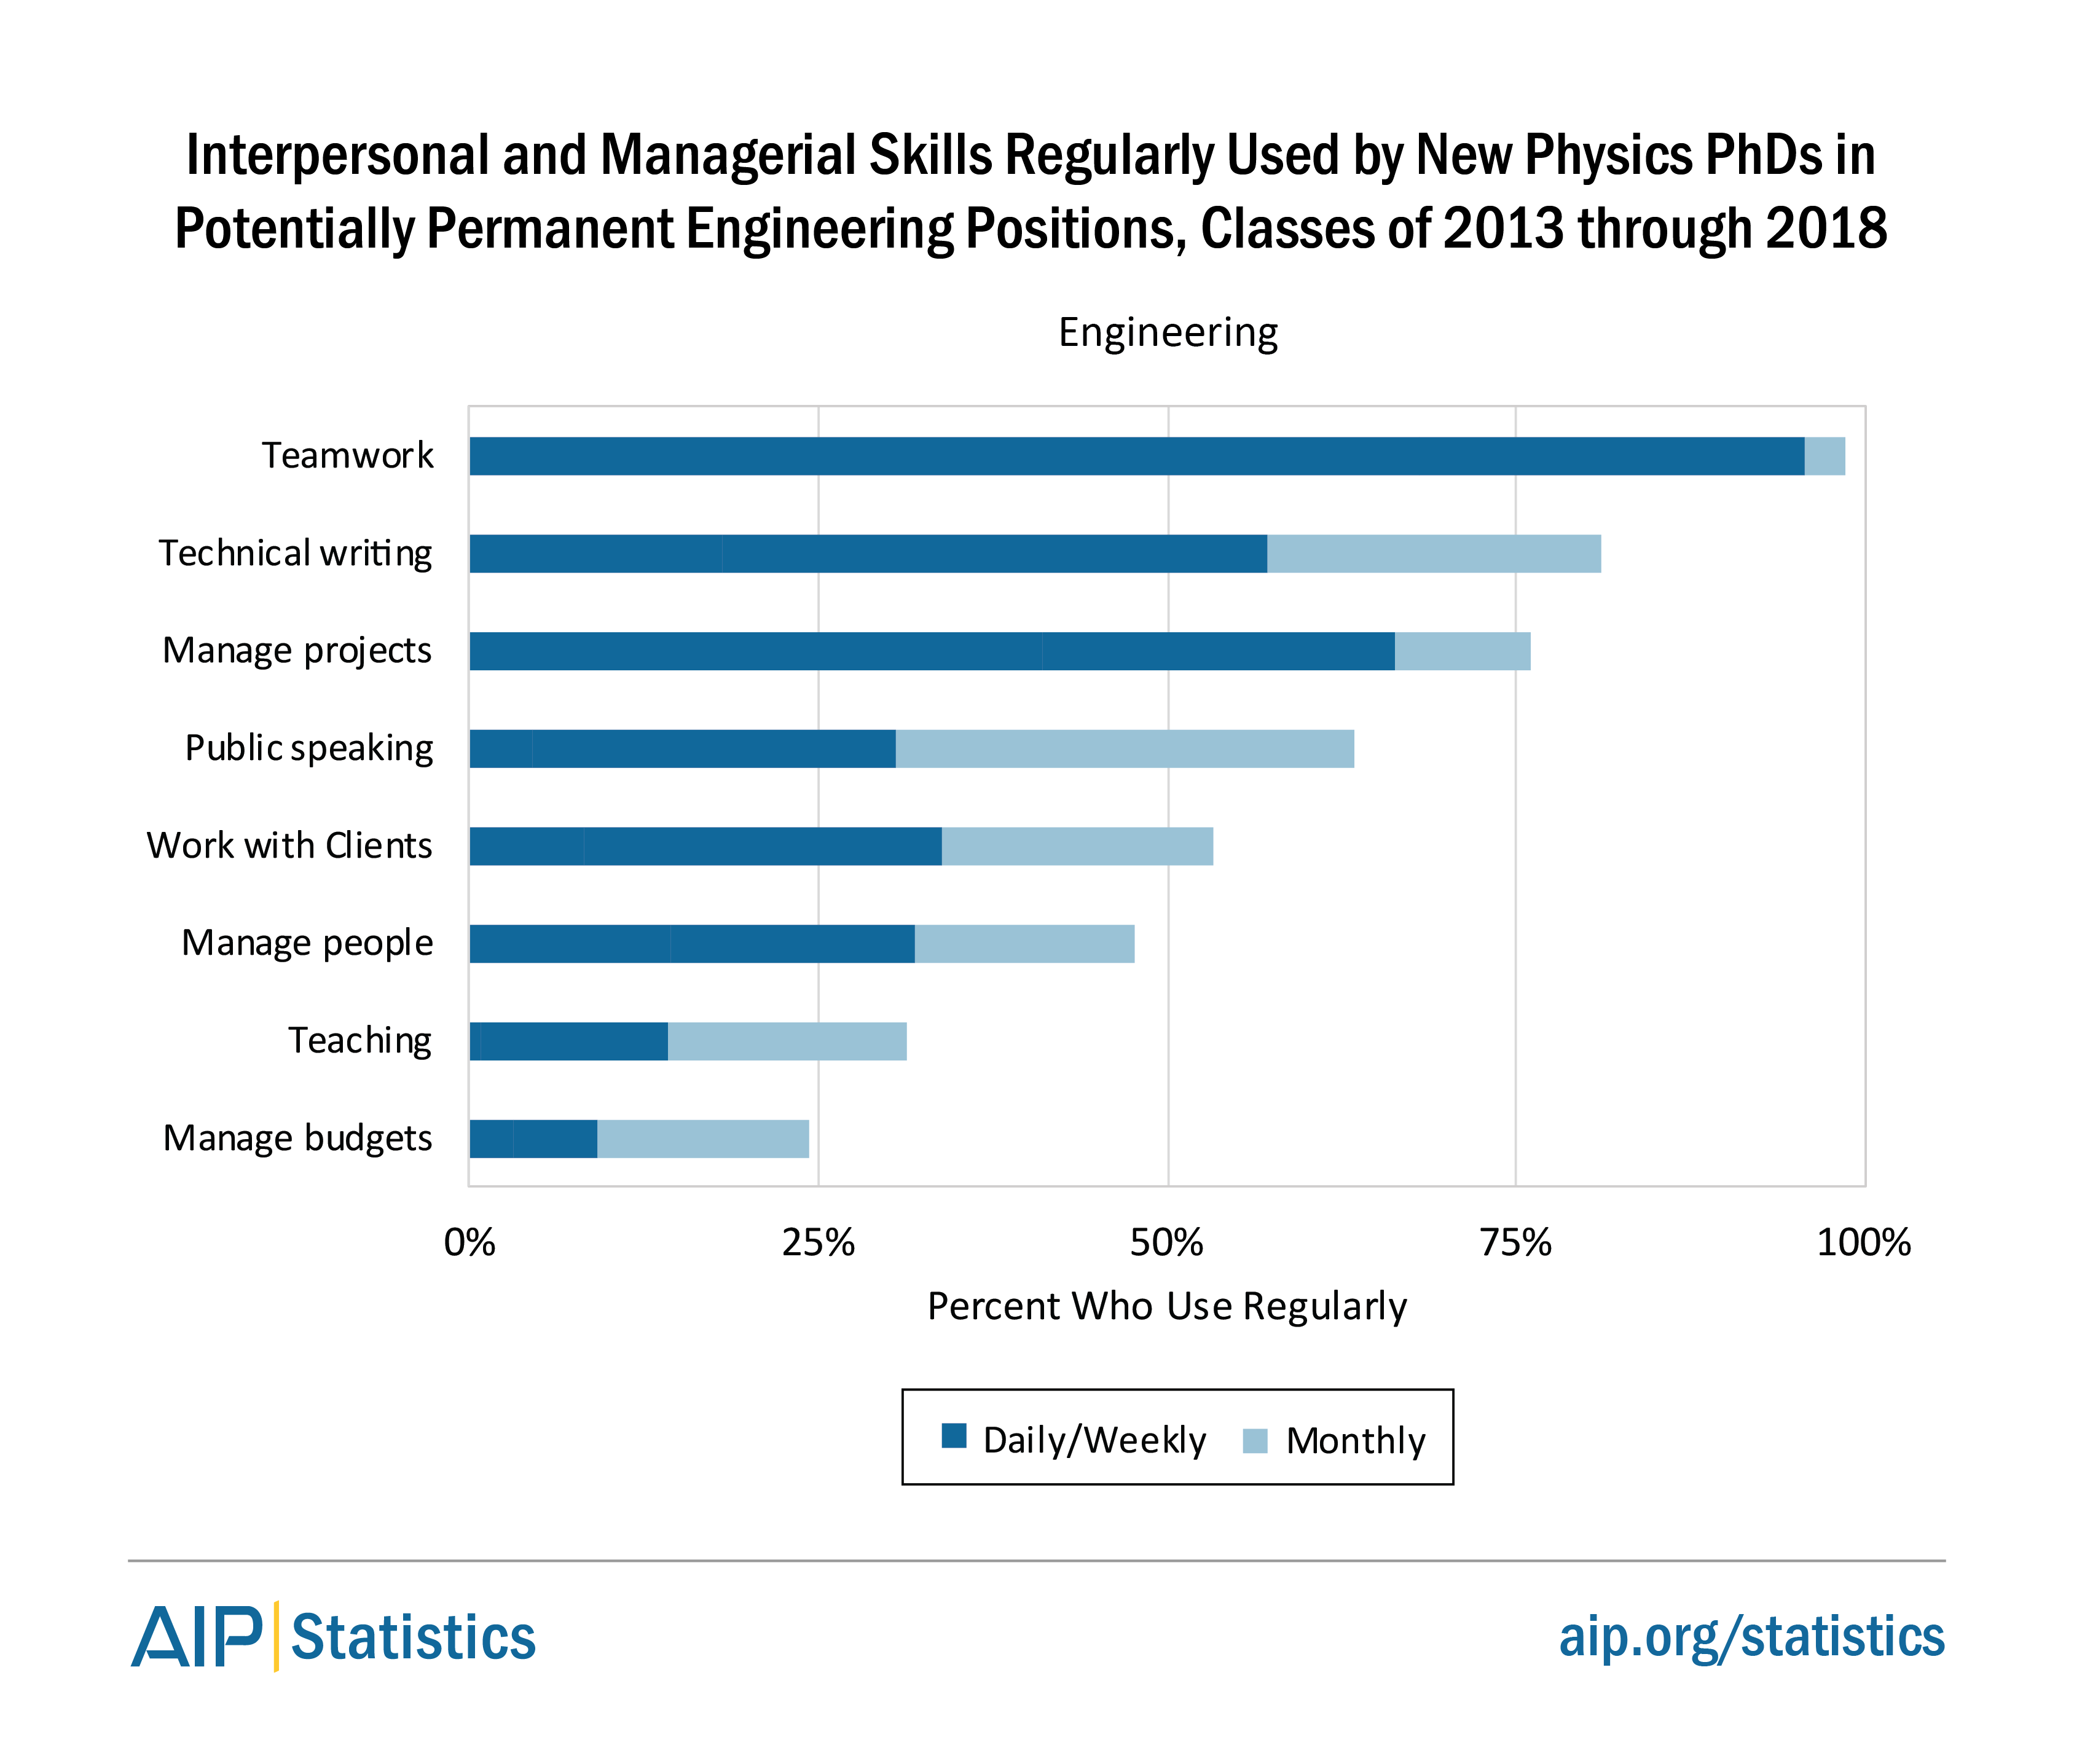 Interpersonal and Managerial Skills Used by Physics PhDs in Engineering Positions